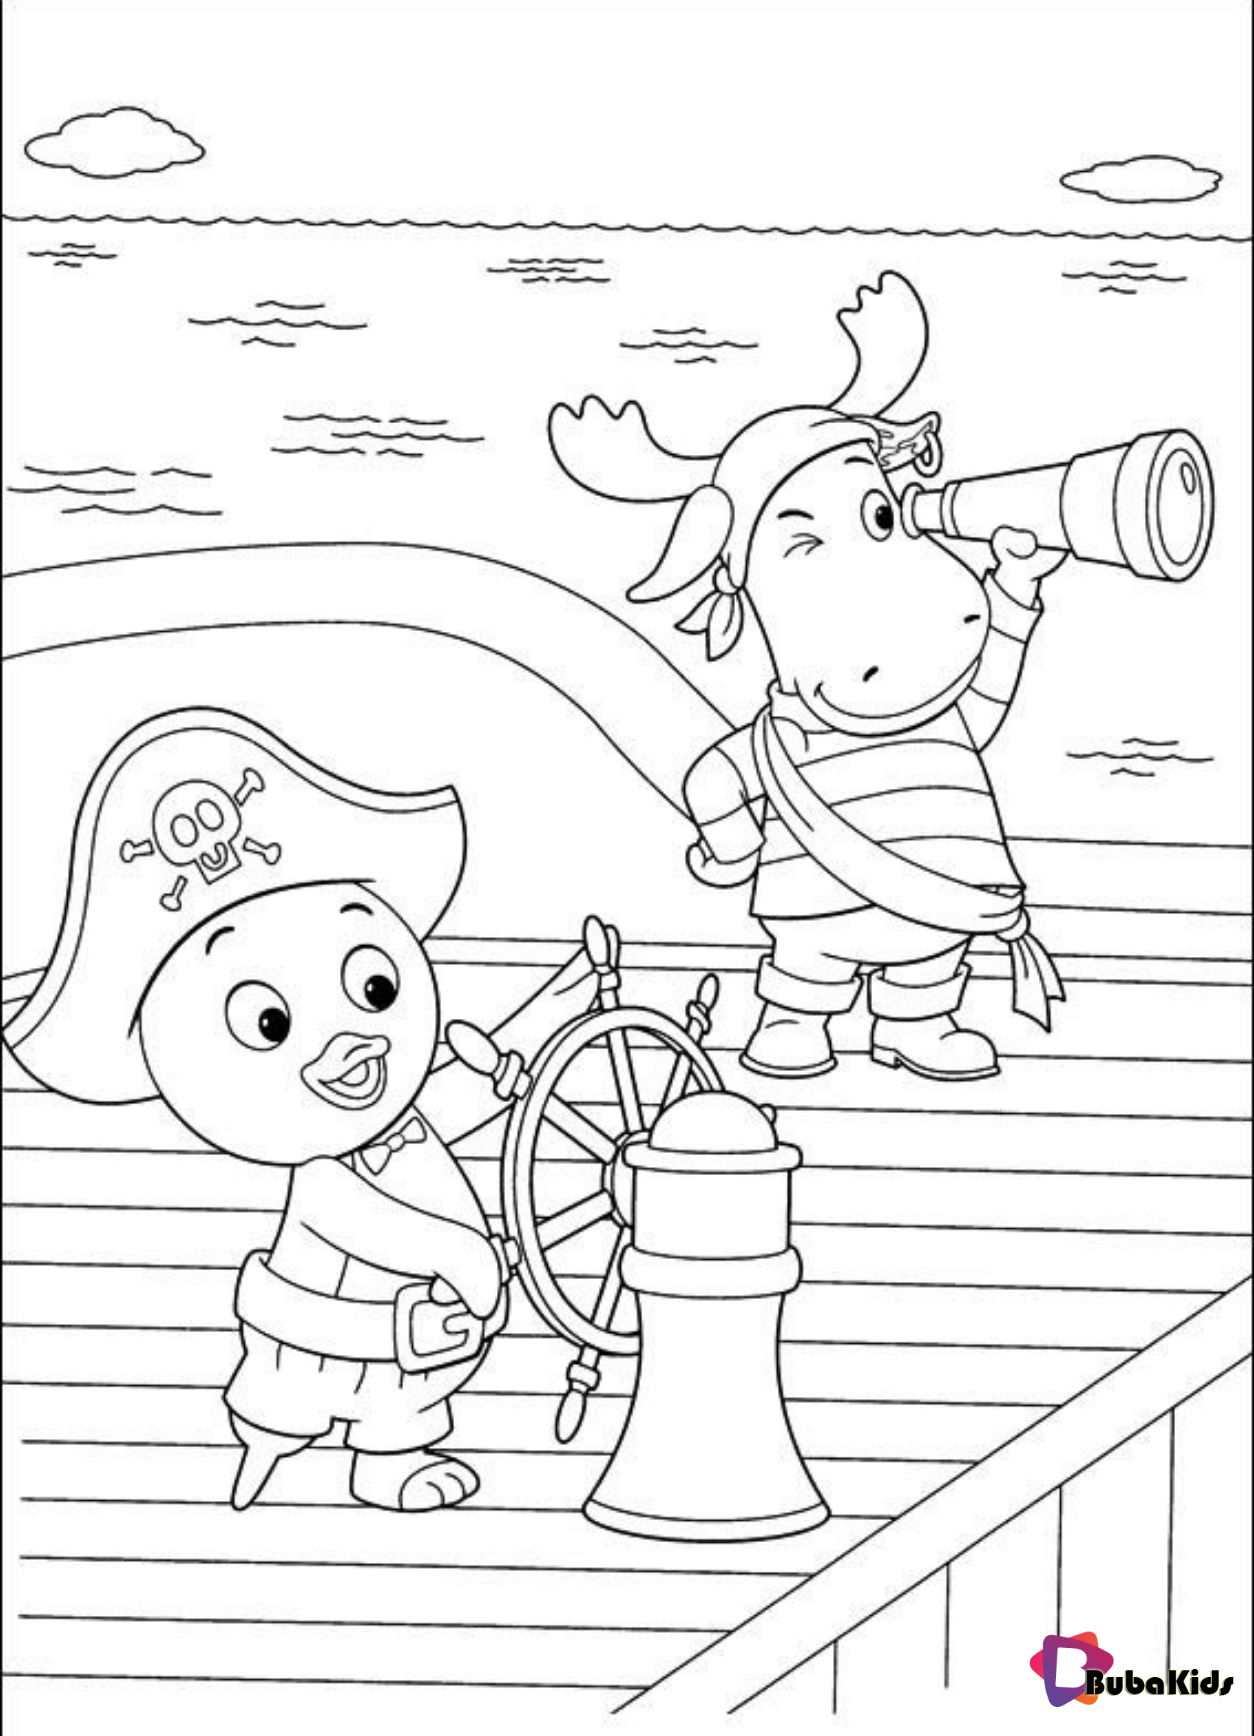 The Backyardigans Printable Coloring Pages Wallpaper